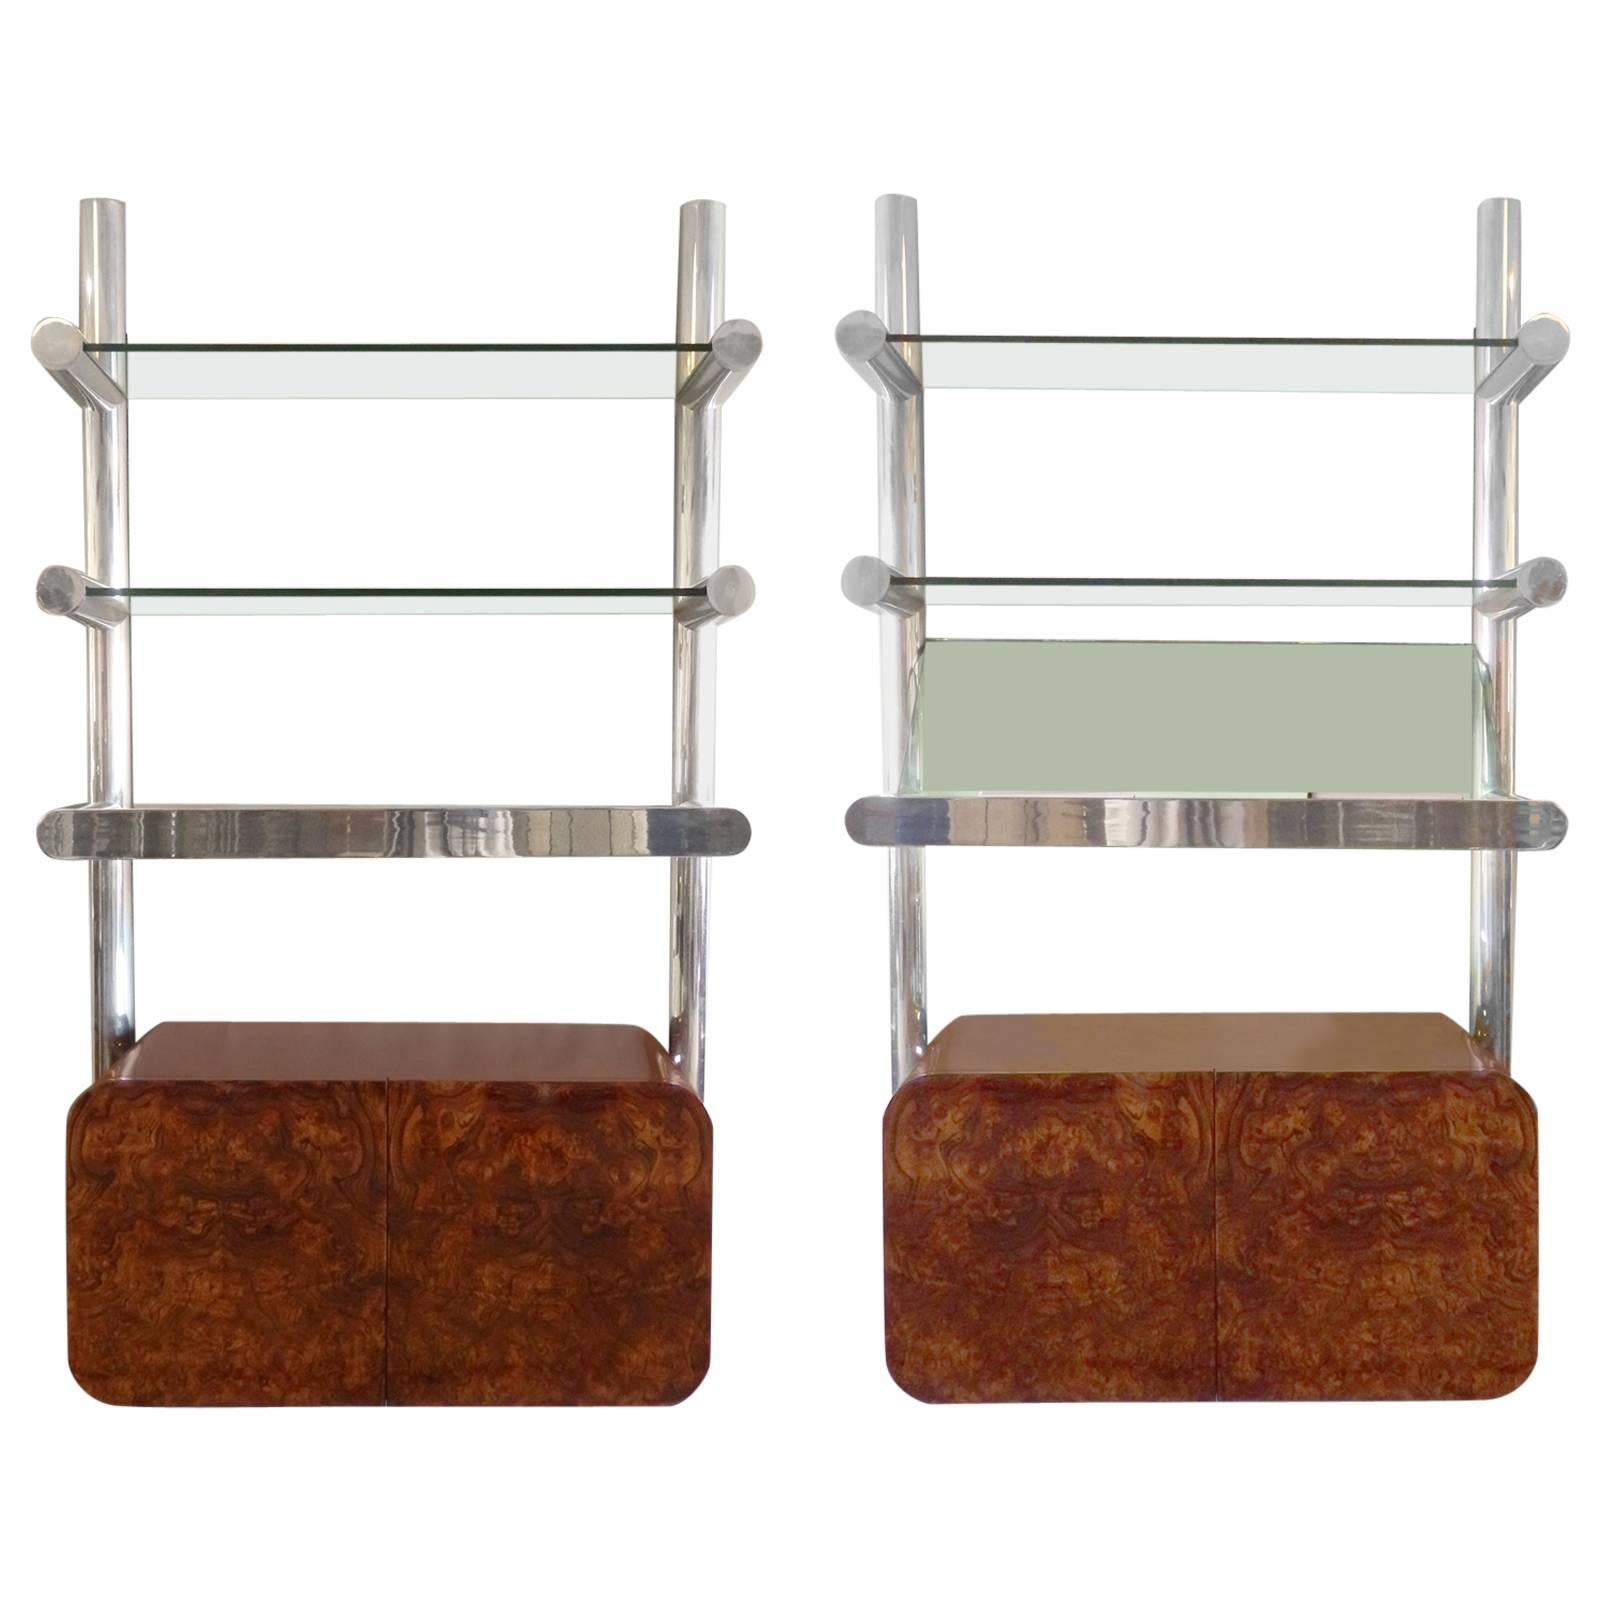 Pair of Janet Schweitzer for Pace Space Age Orba Shelf Systems